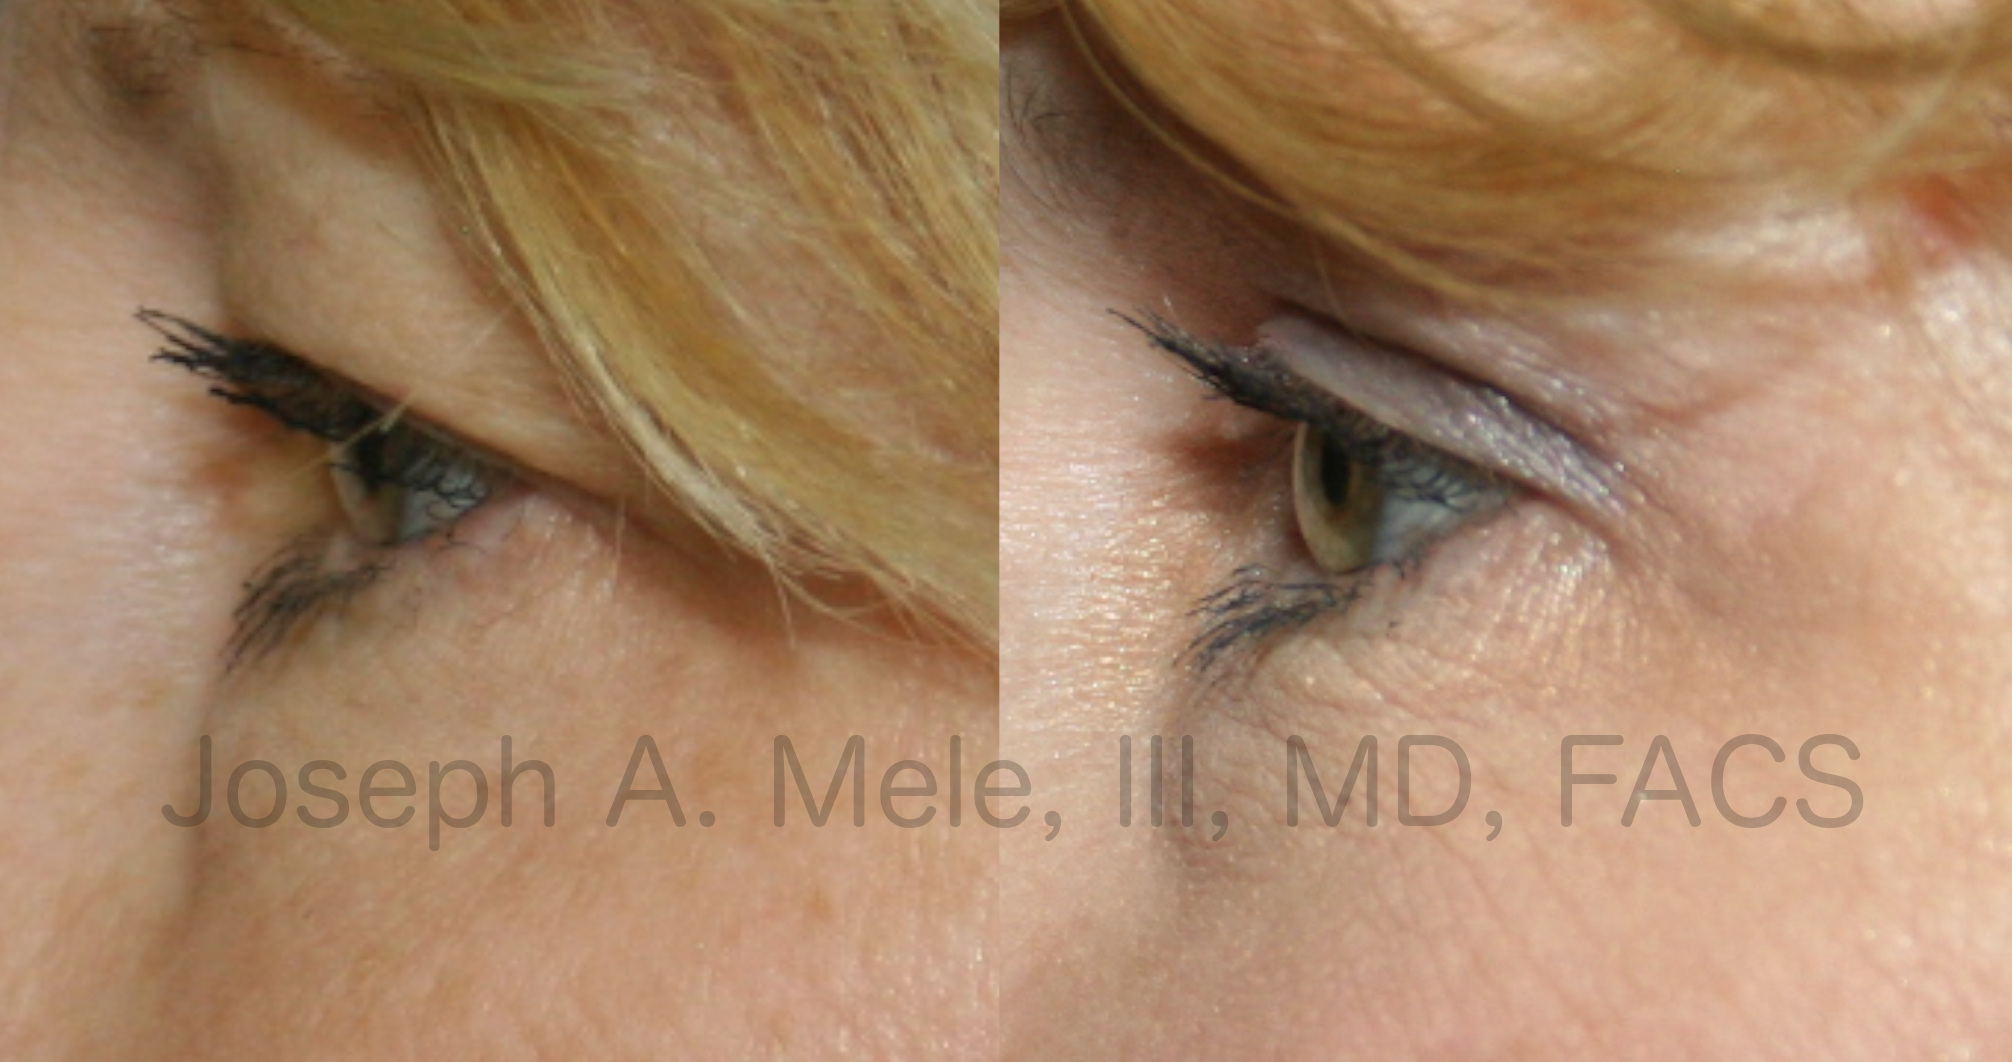 Eyelid Lift before and after pictures (Blepharoplasty)